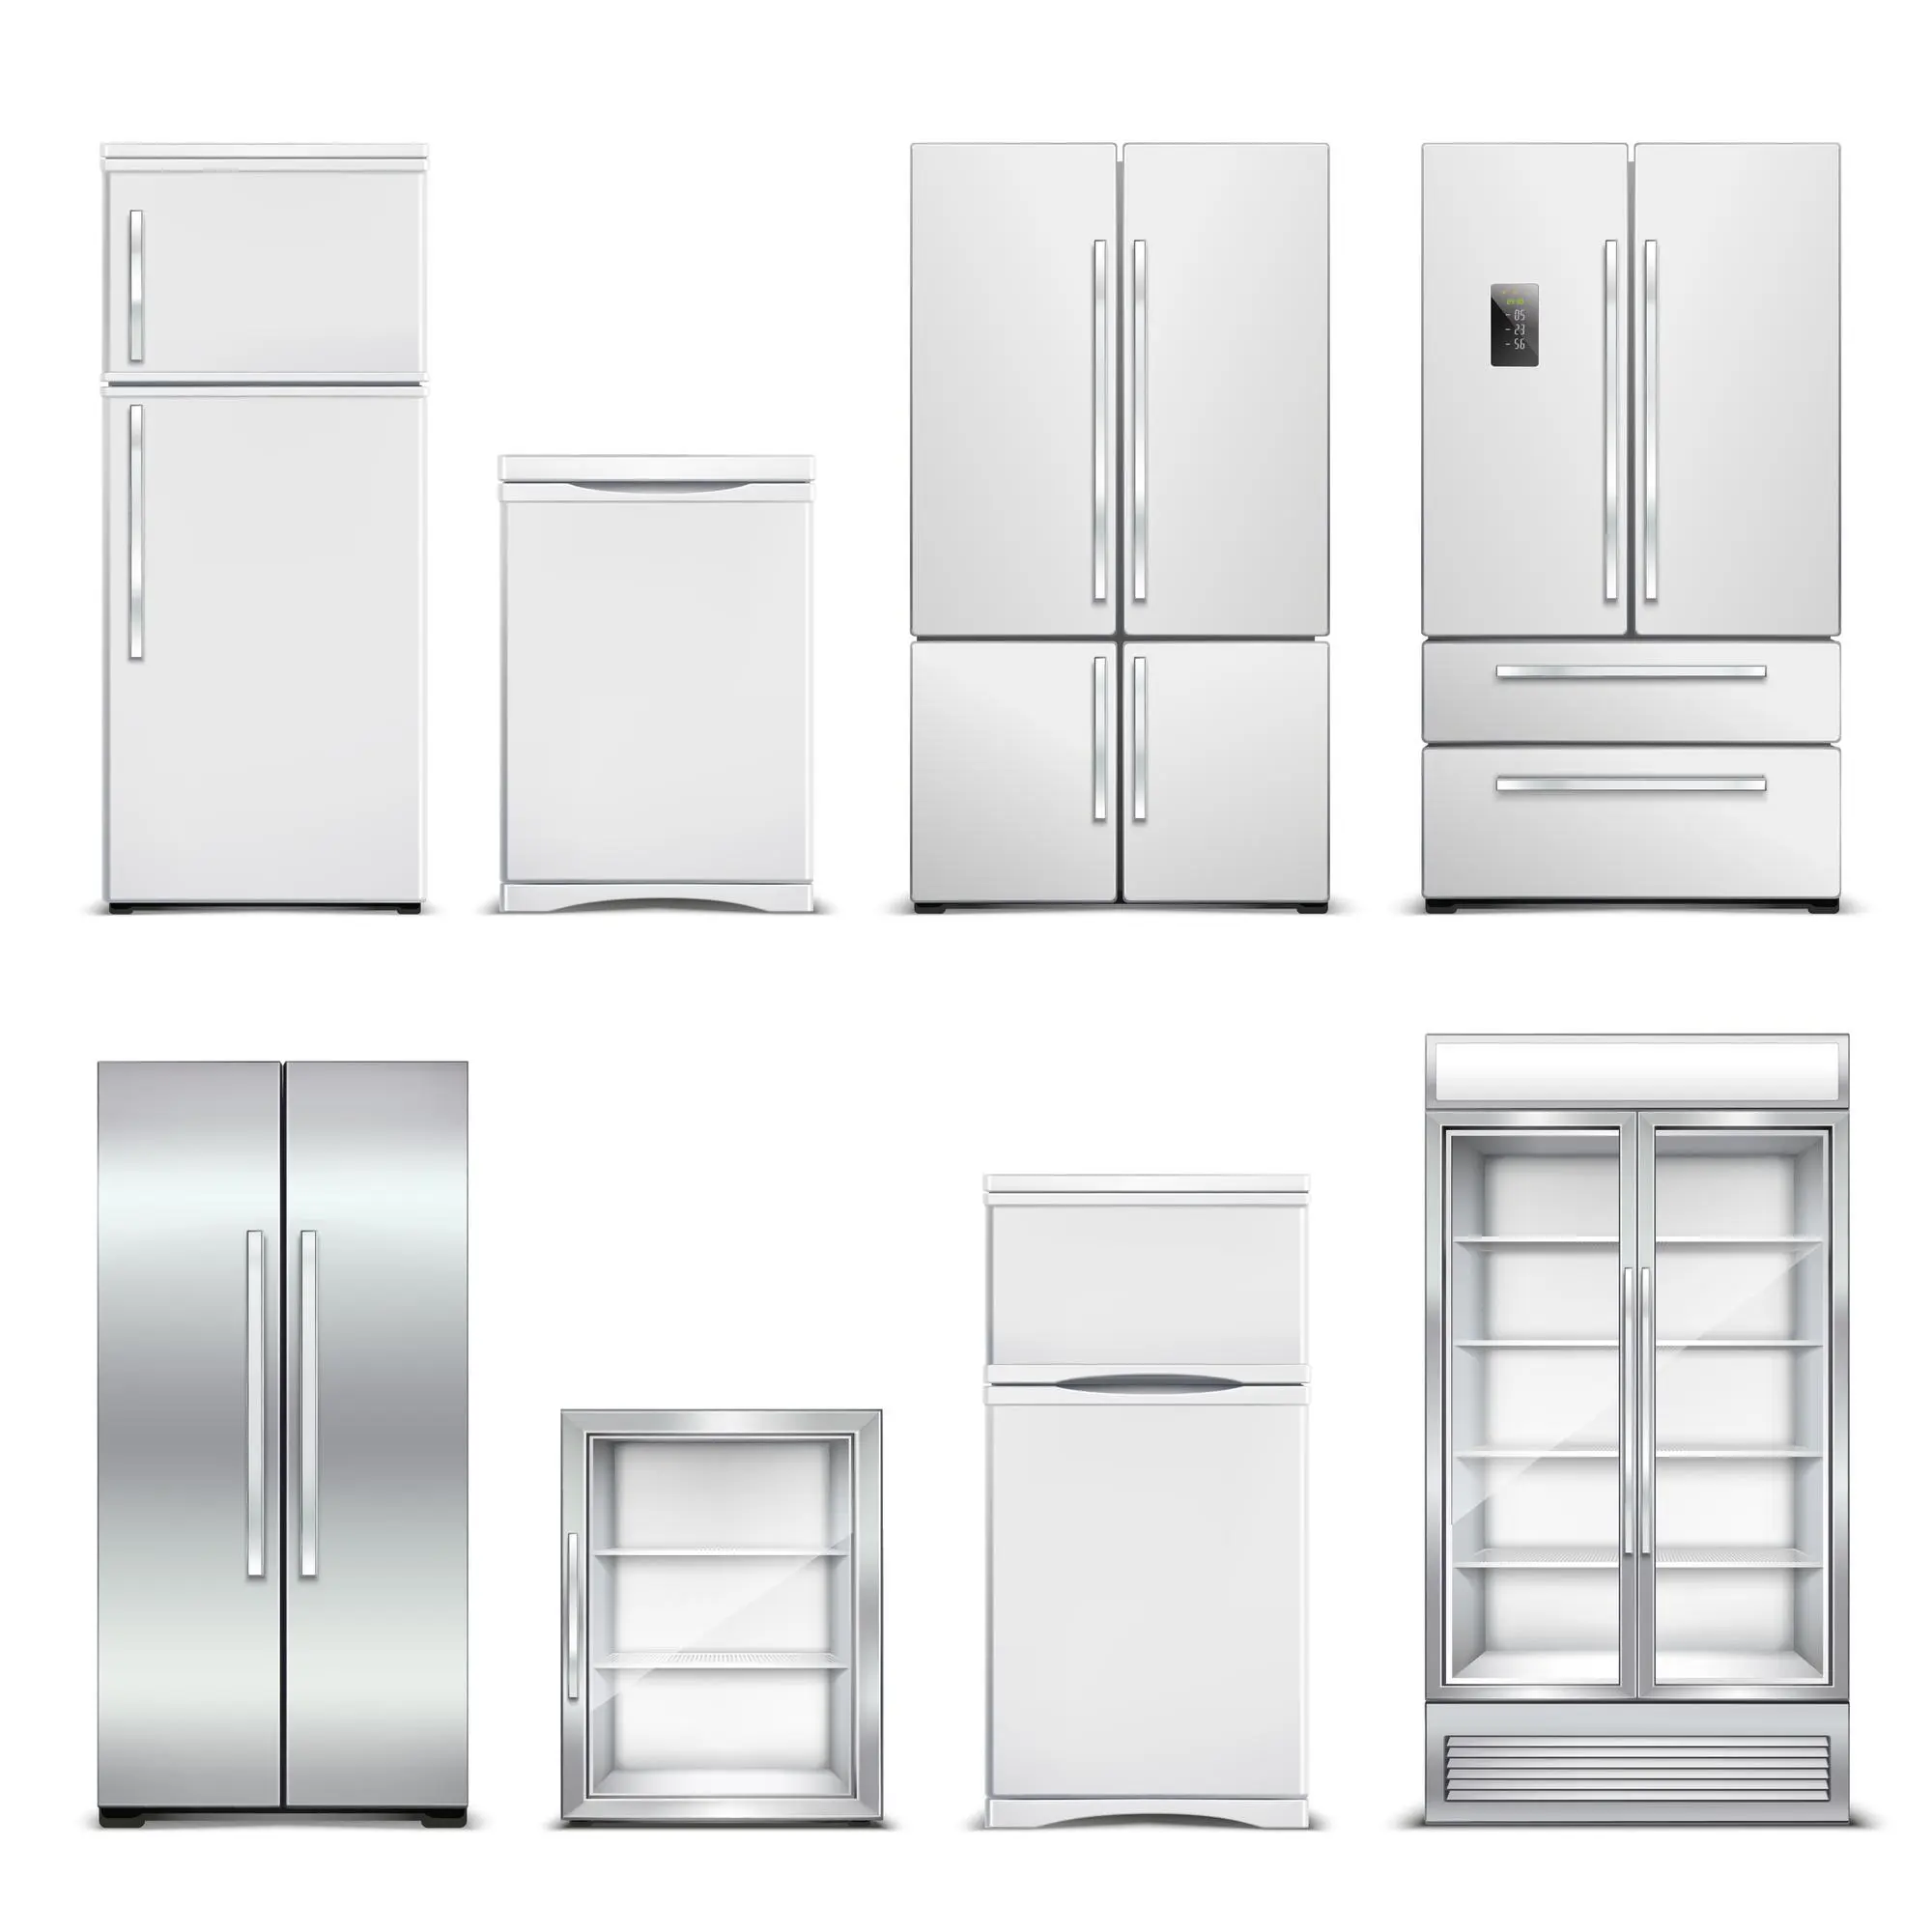 Different Types of Refrigerators to Lease: Find the Perfect Fit for Your Rental Property